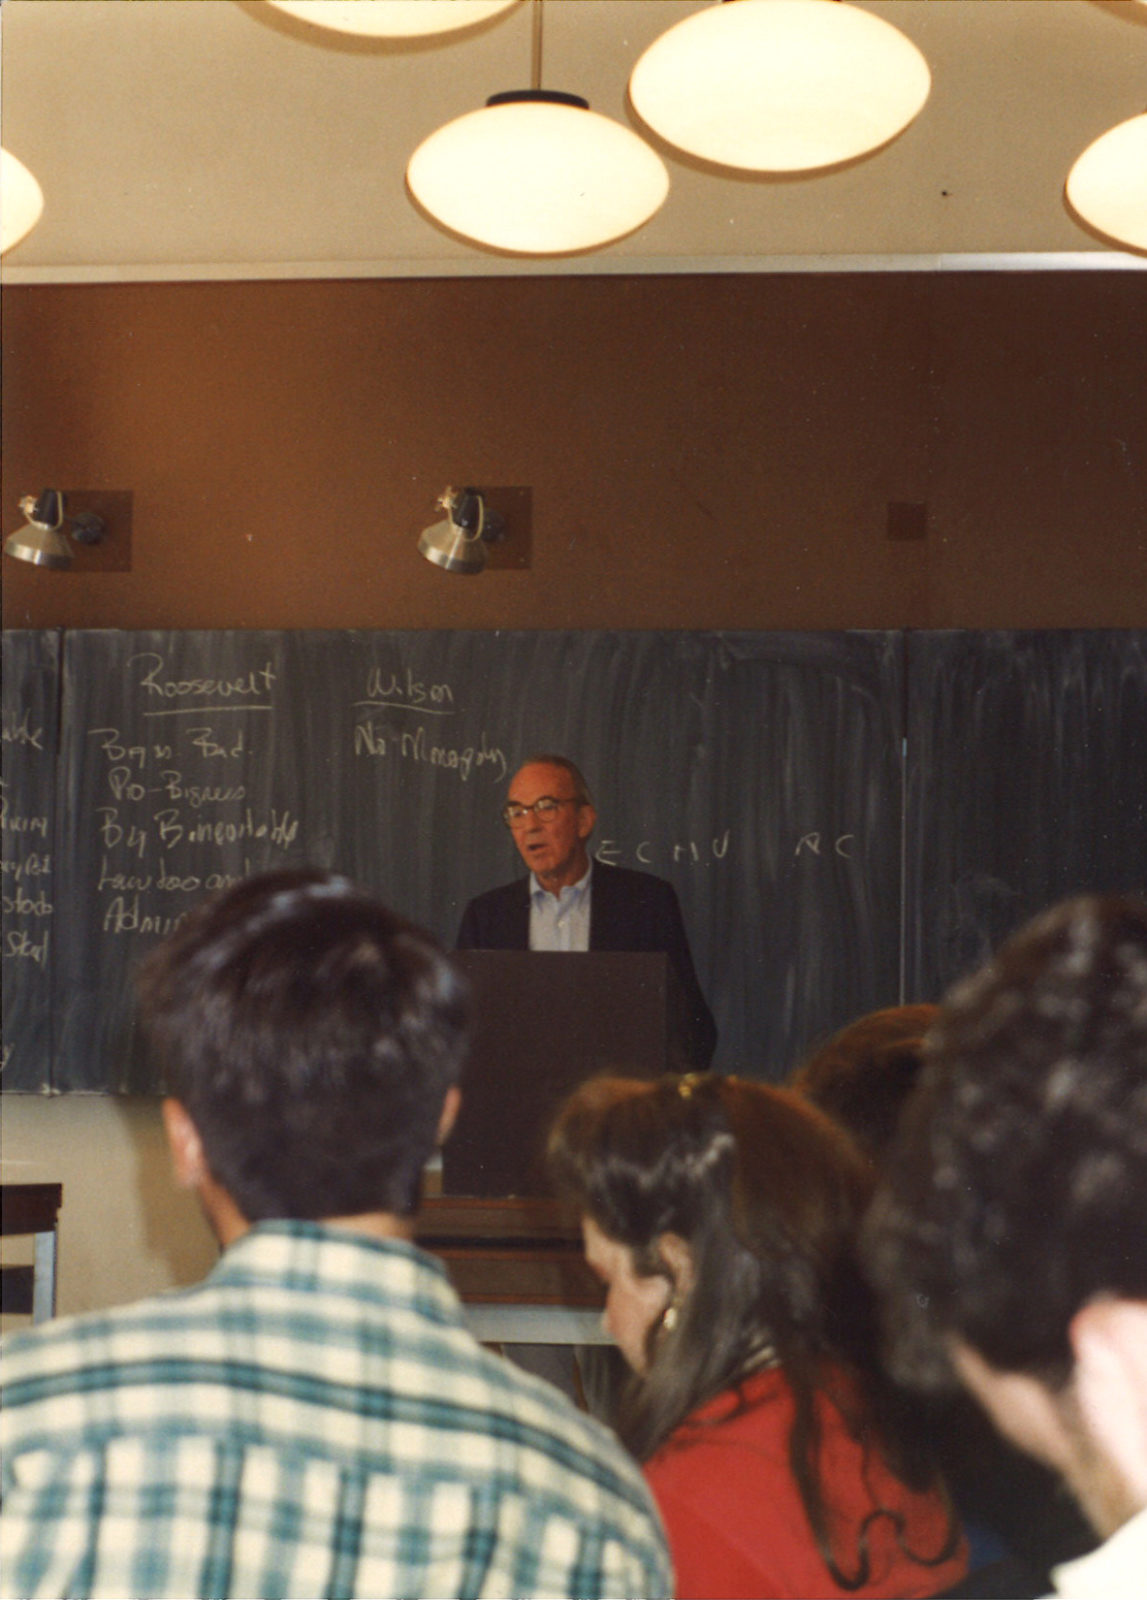 Berns lecturing TFAS students on political philosophy and the U.S. Constitution during the inaugural TFAS International institute in Prague.